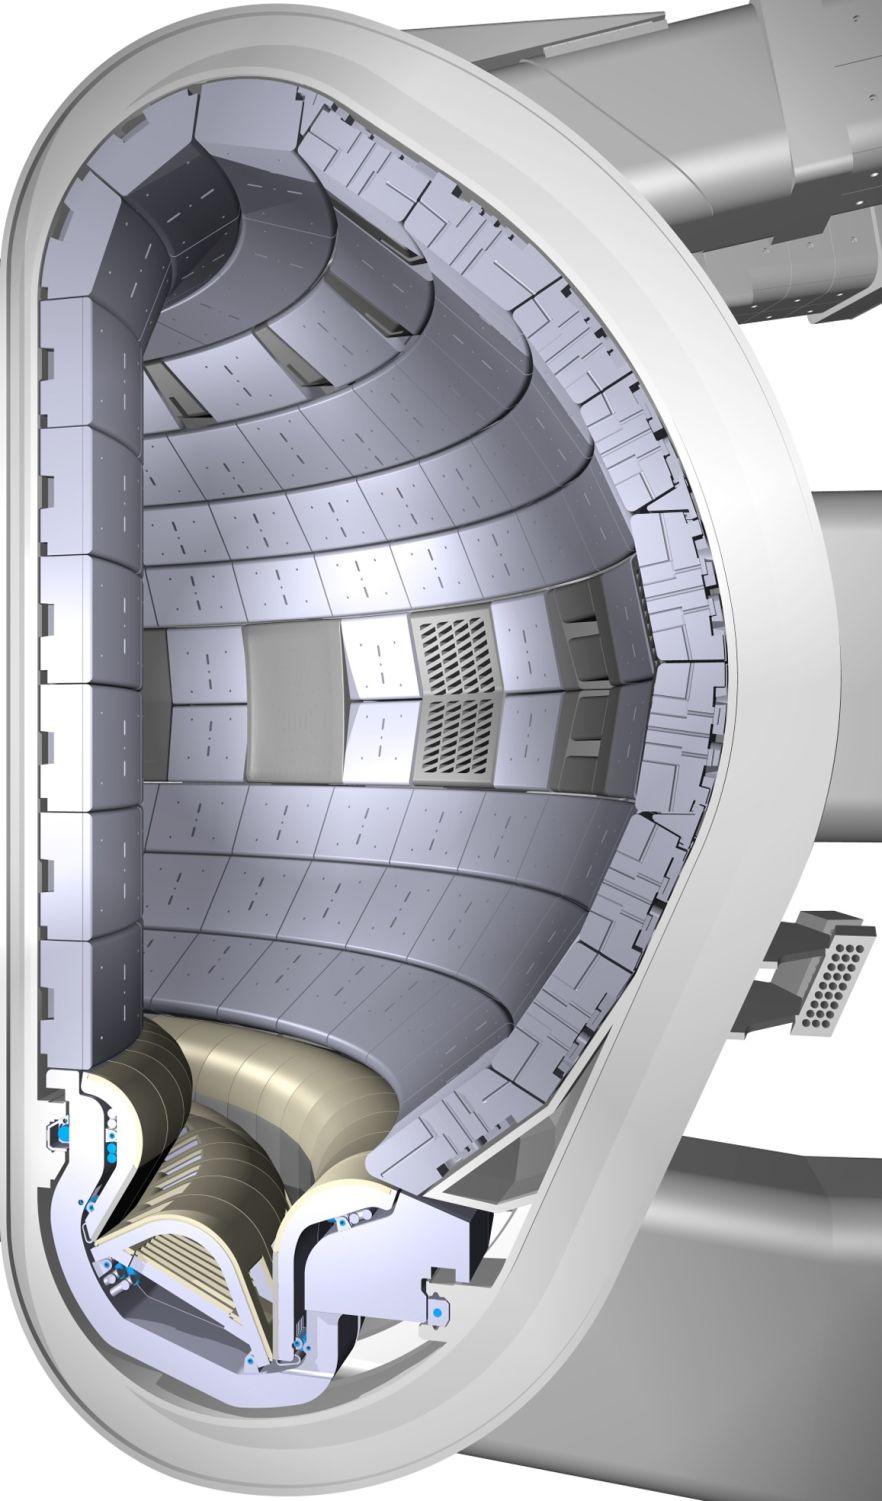 Motivation: ITER vacuum vessel Tritium retention and removal is a high risk and high consequence issue for ITER. predictive understanding lacking Conventional Wall Diagnostics: 1.